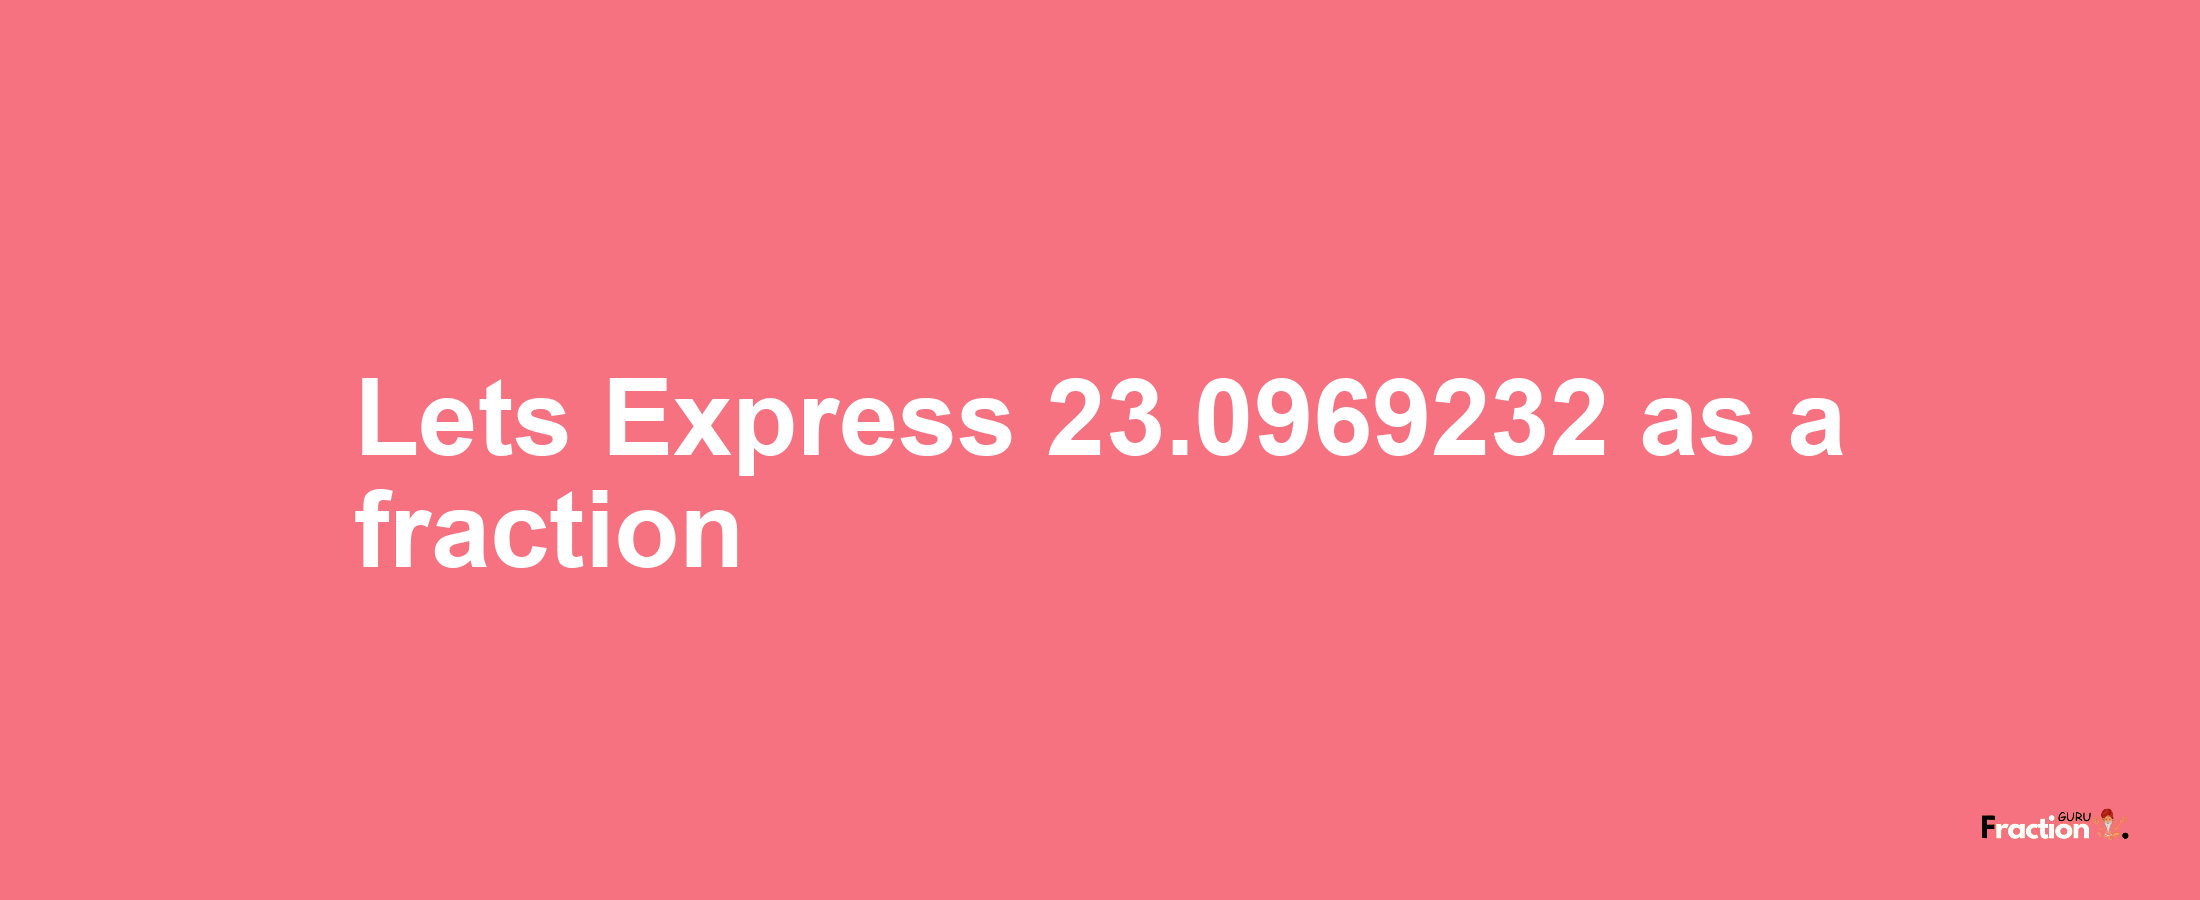 Lets Express 23.0969232 as afraction